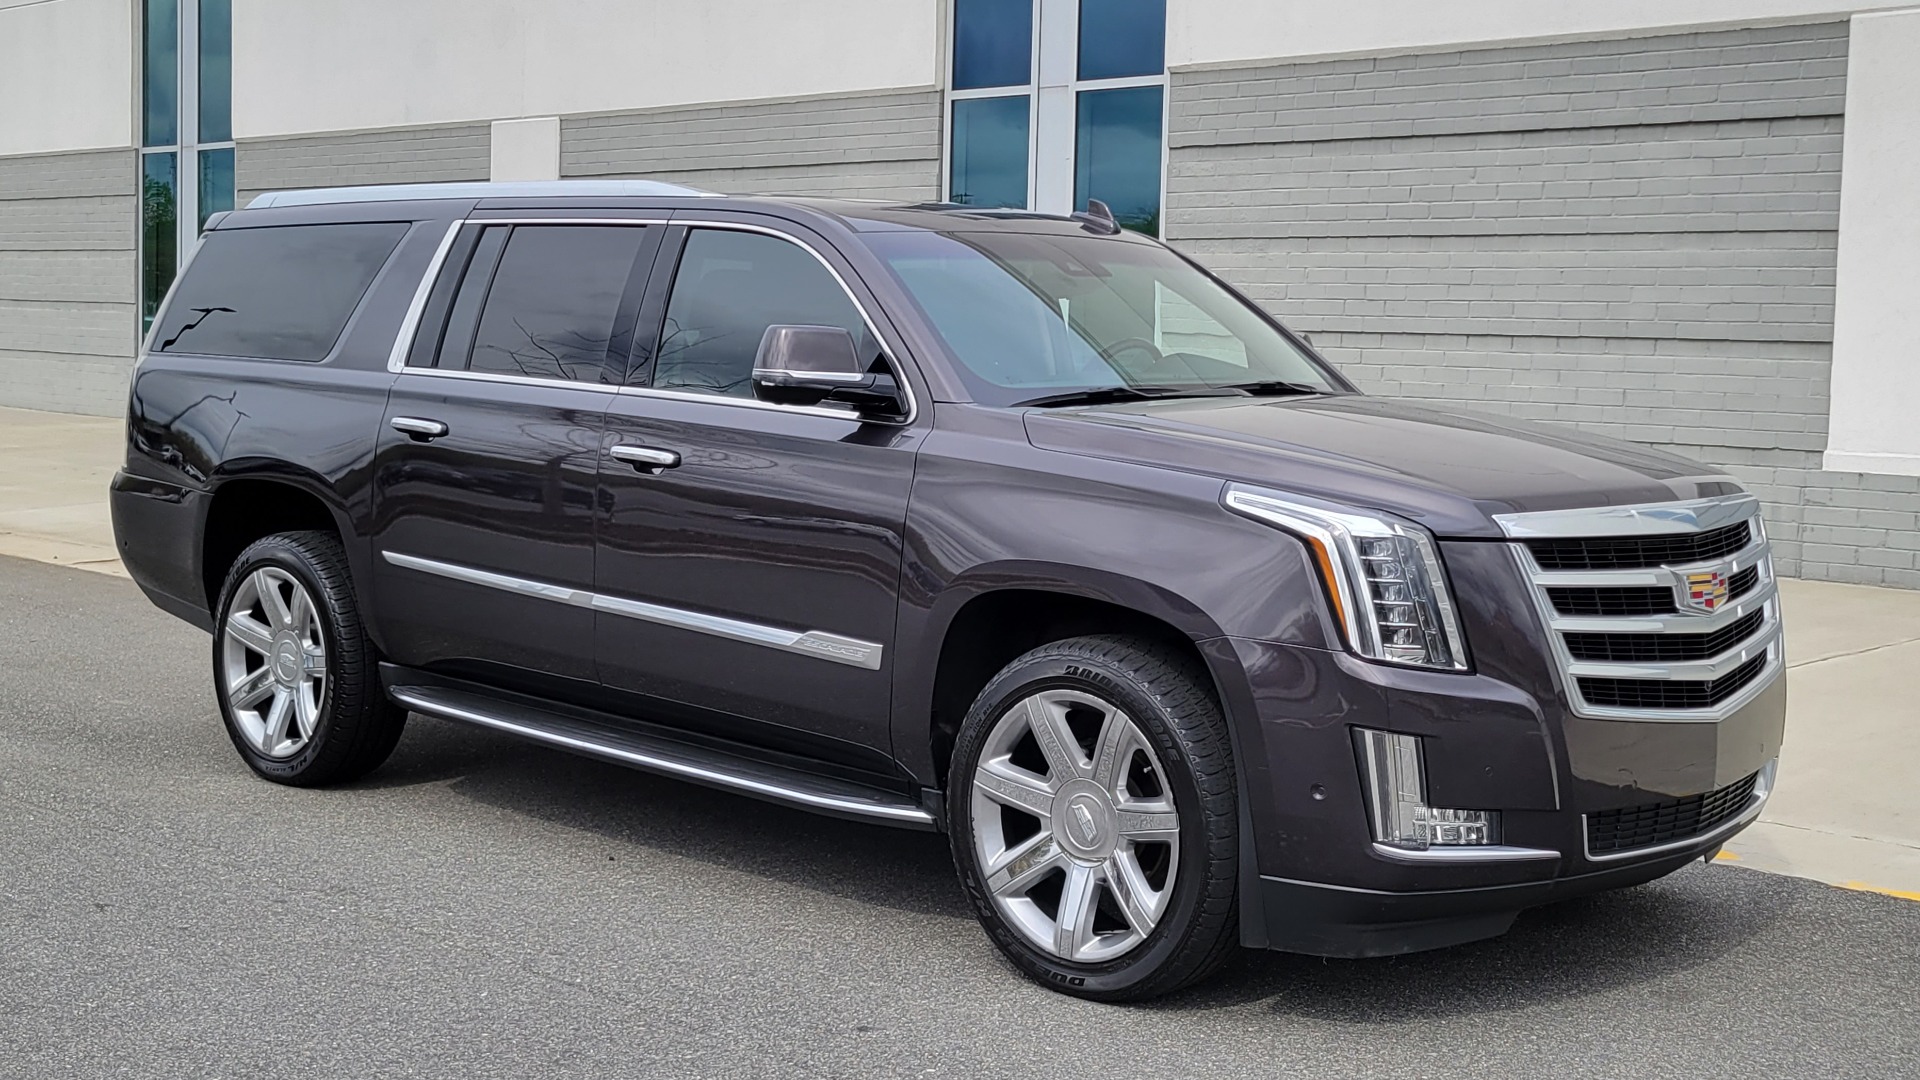 Used 2018 Cadillac ESCALADE ESV LUXURY 4WD 6.2L / NAV / BOSE / SUNROOF / 3-ROW / REARVIEW for sale Sold at Formula Imports in Charlotte NC 28227 7